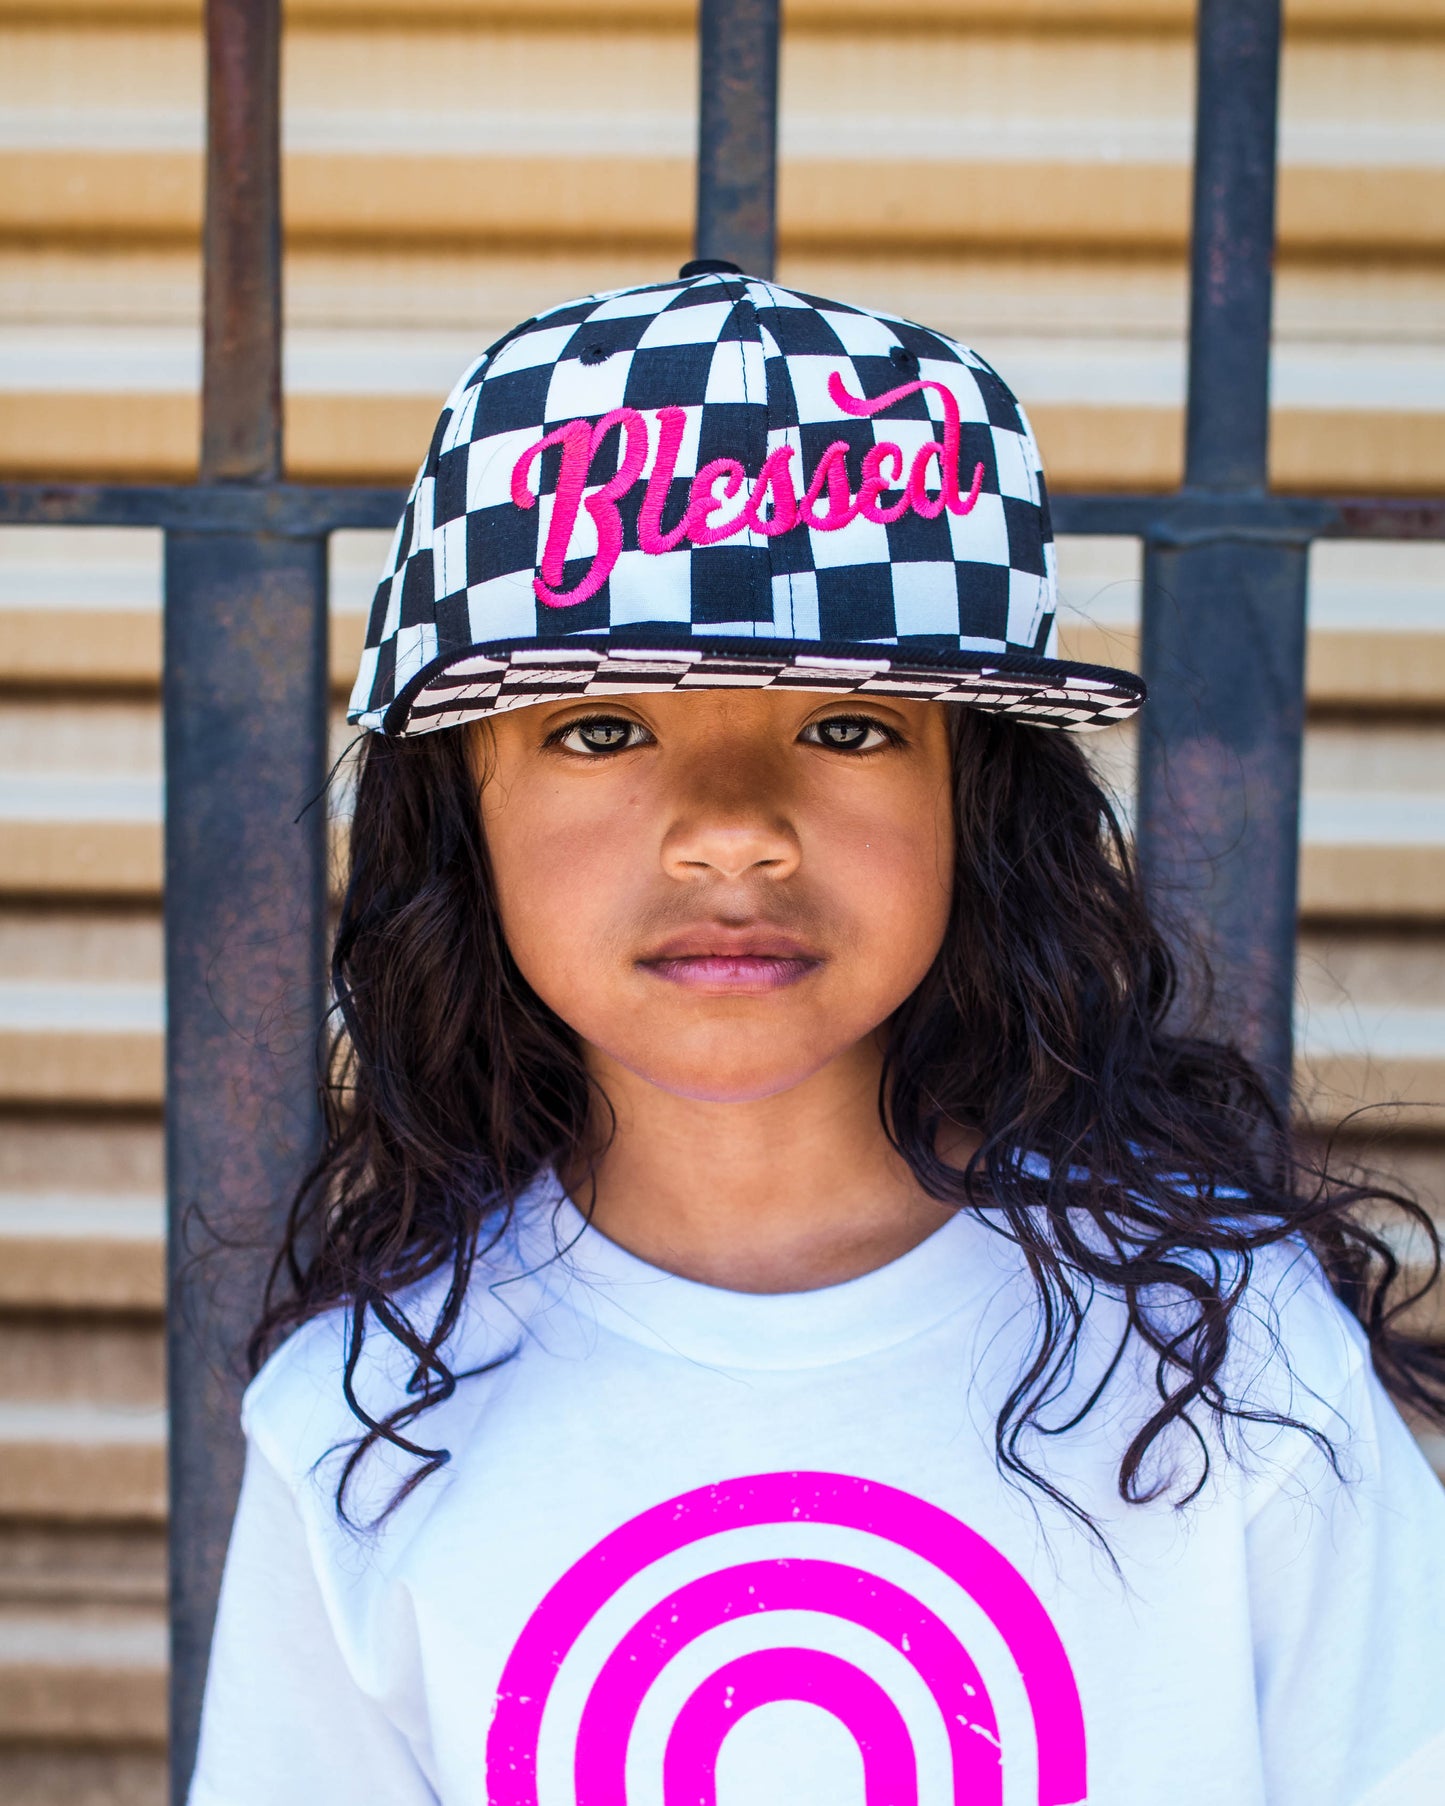 "Blessed" Checkered Kids SnapBack